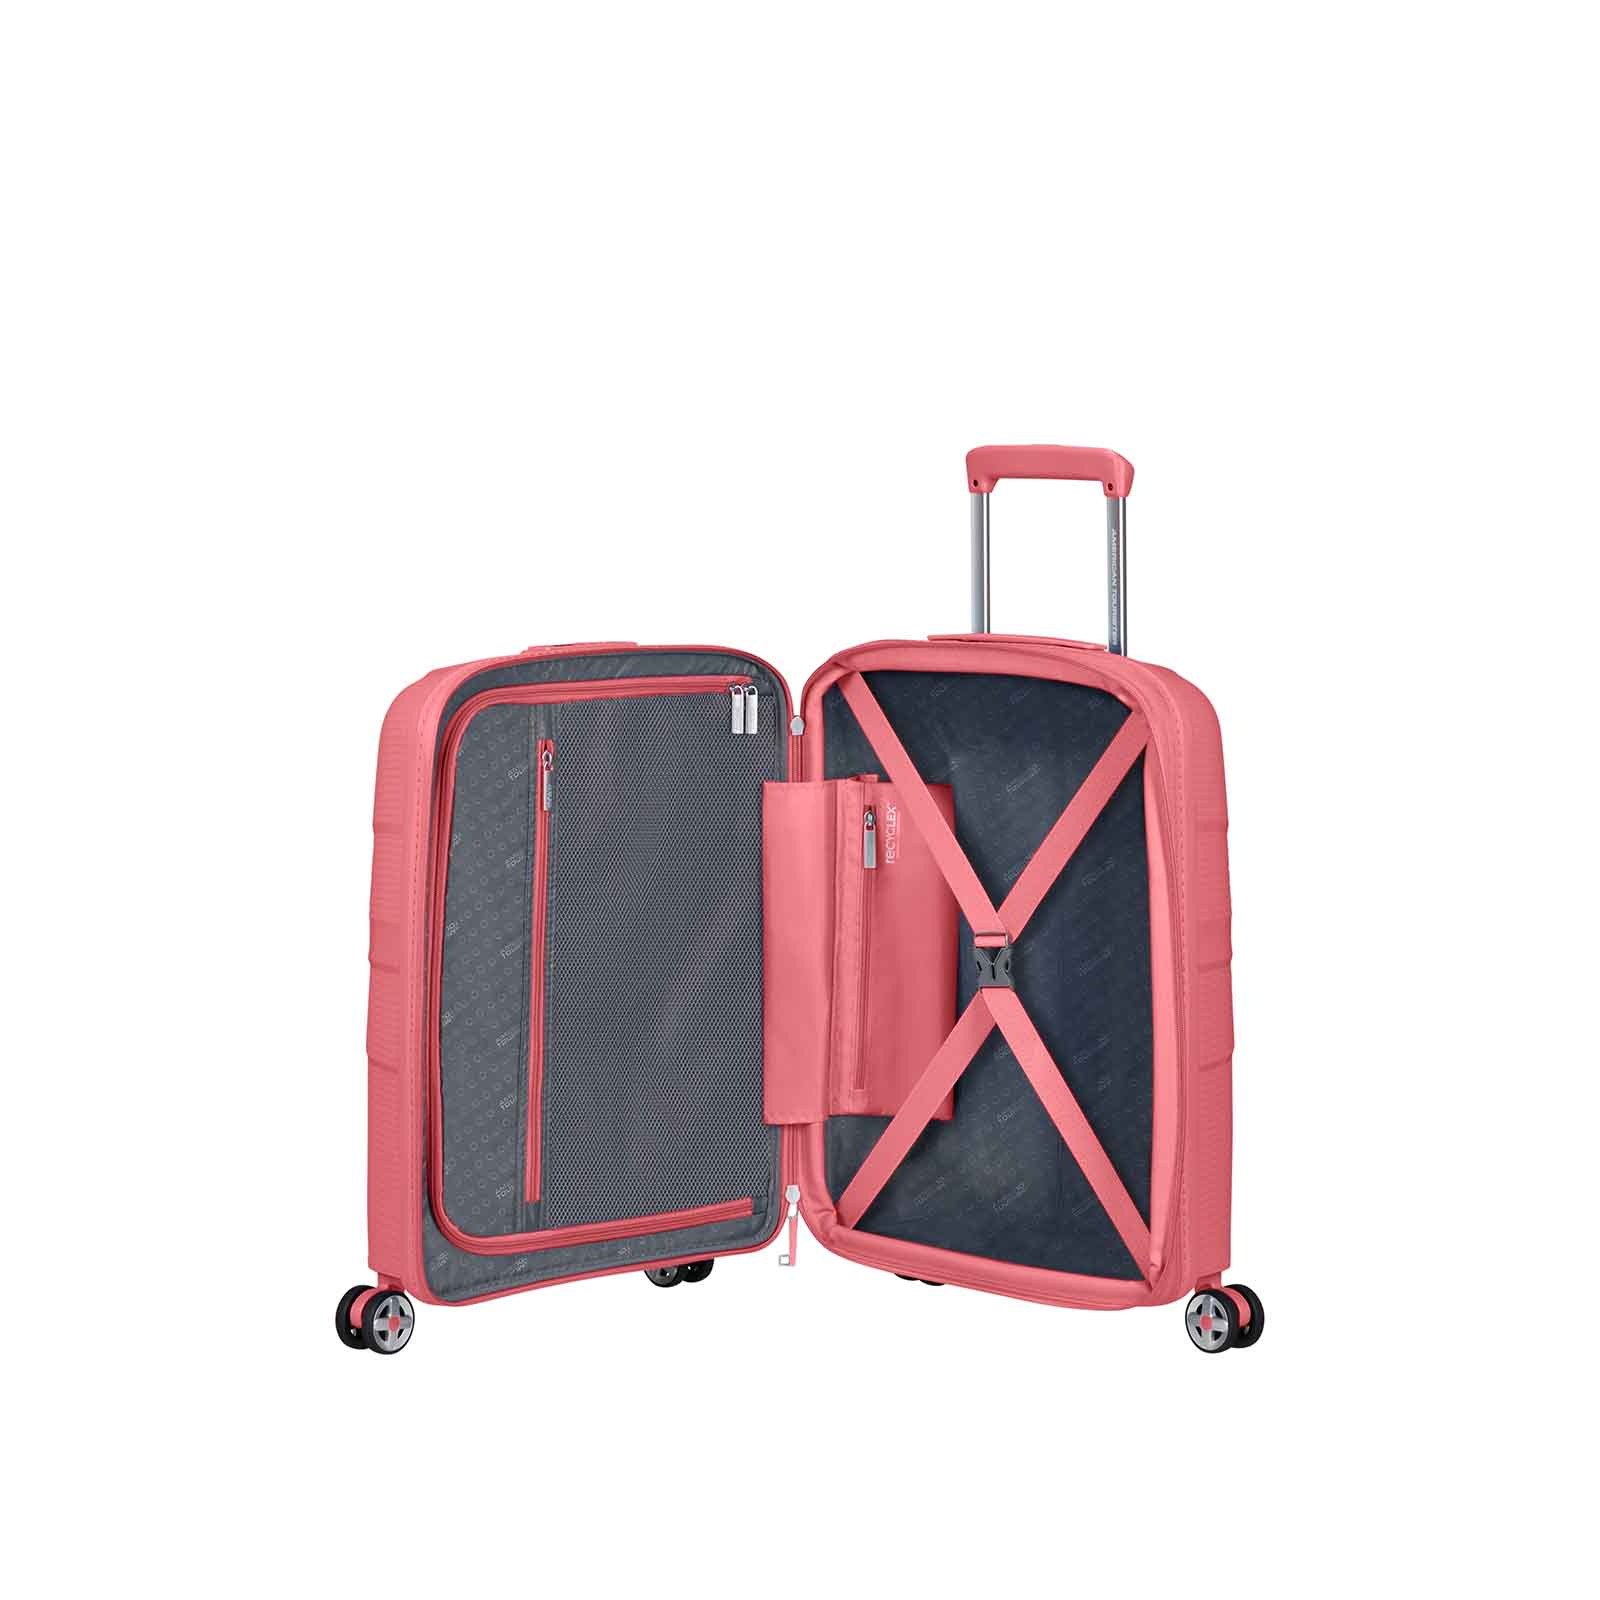 American-Tourister-Starvibe-55cm-Carry-On-Suitcase-Coral-Open